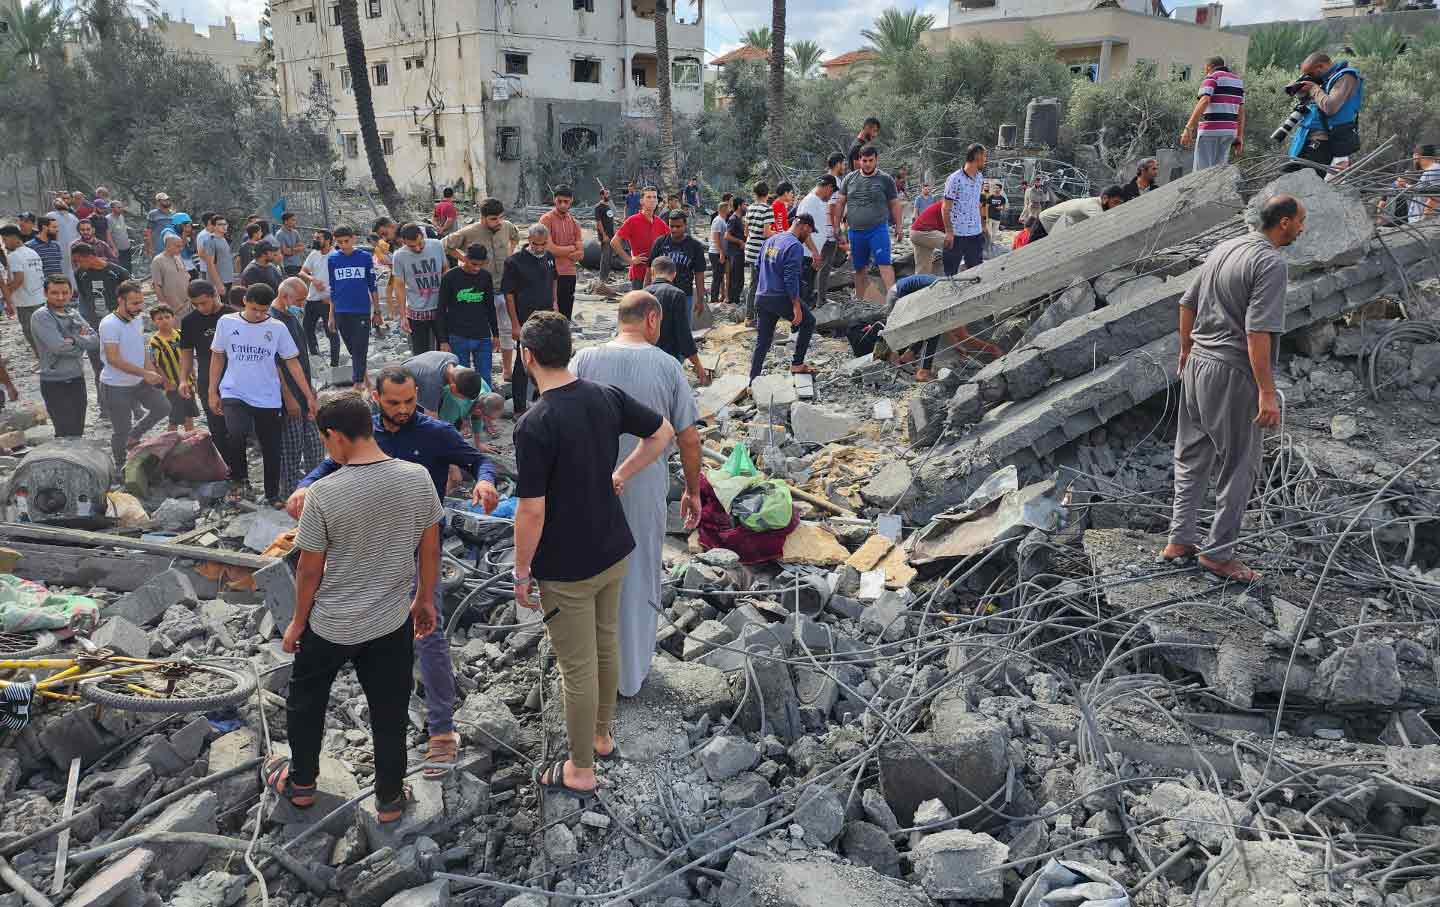 A group of Palestinians stands amid the rubble of a bombed building.